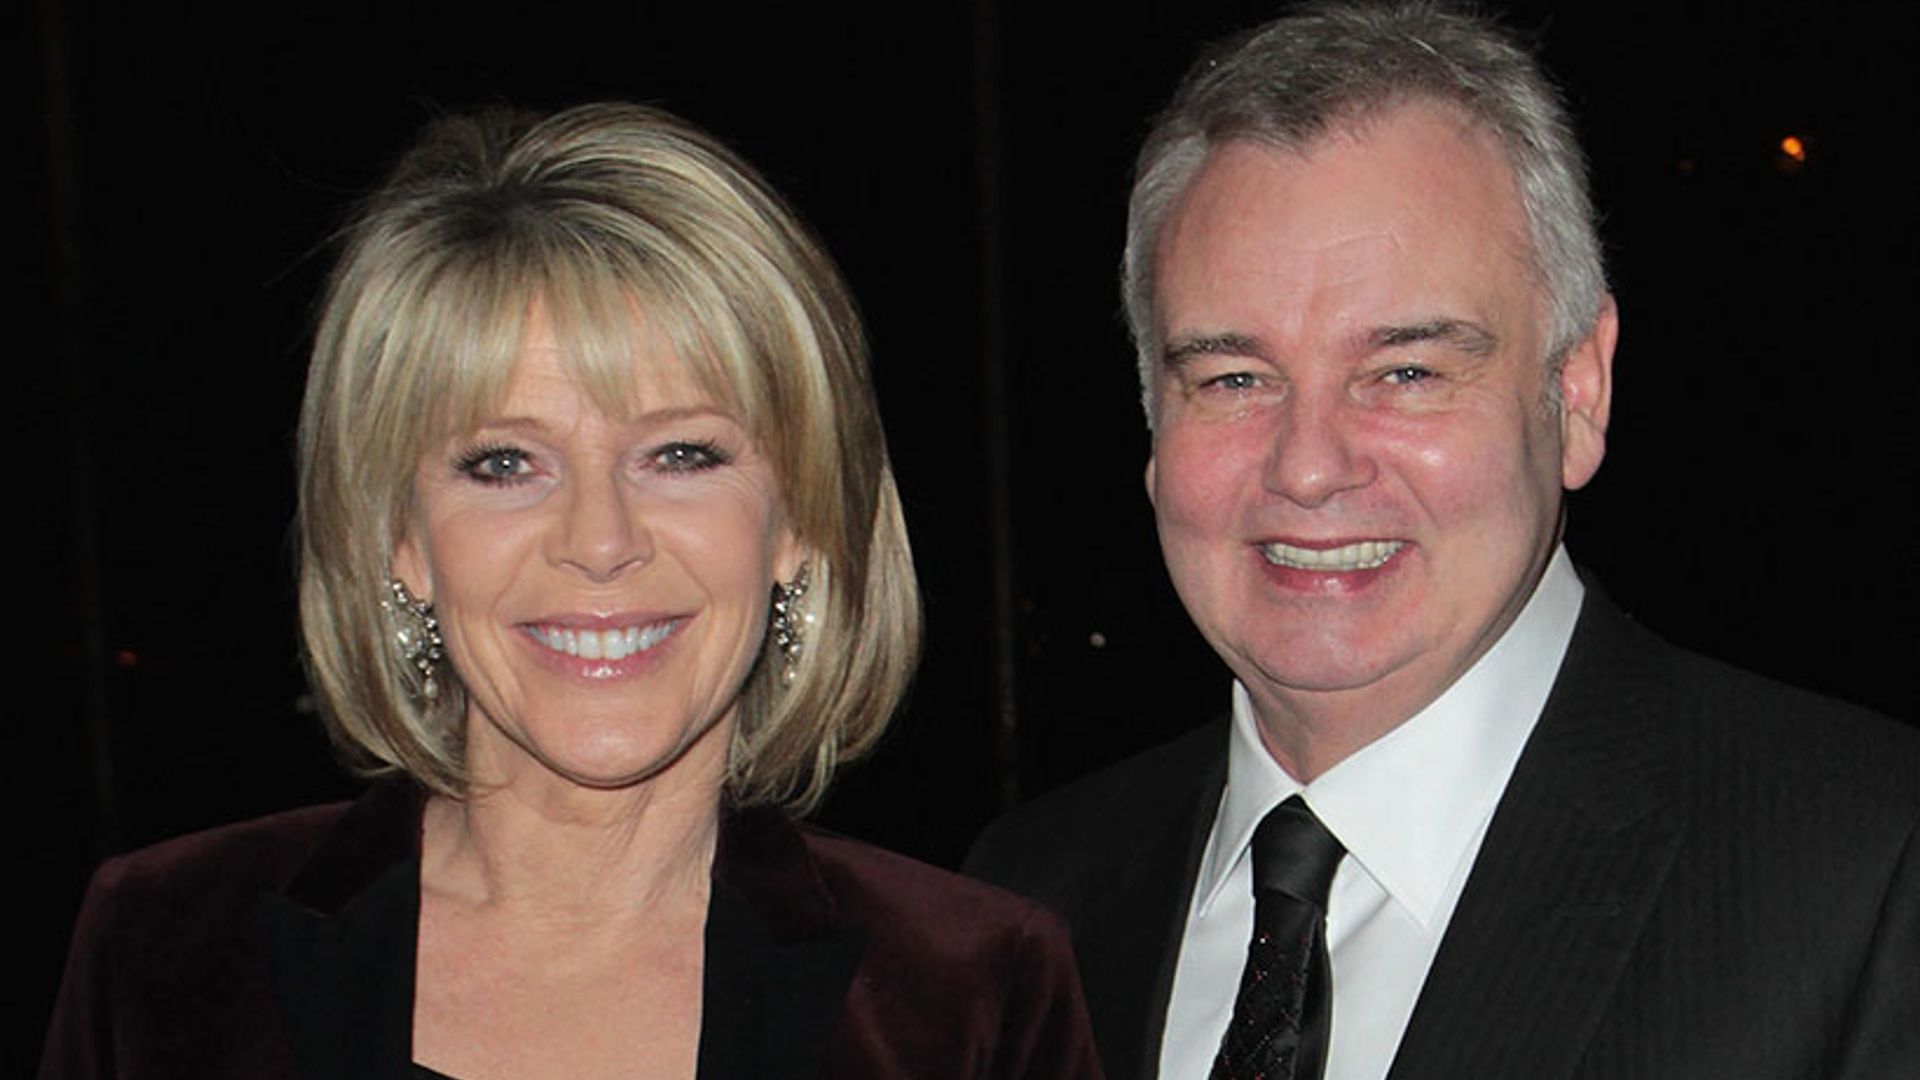 Eamonn Holmes and Ruth Langsford as you've never seen them - see pictures